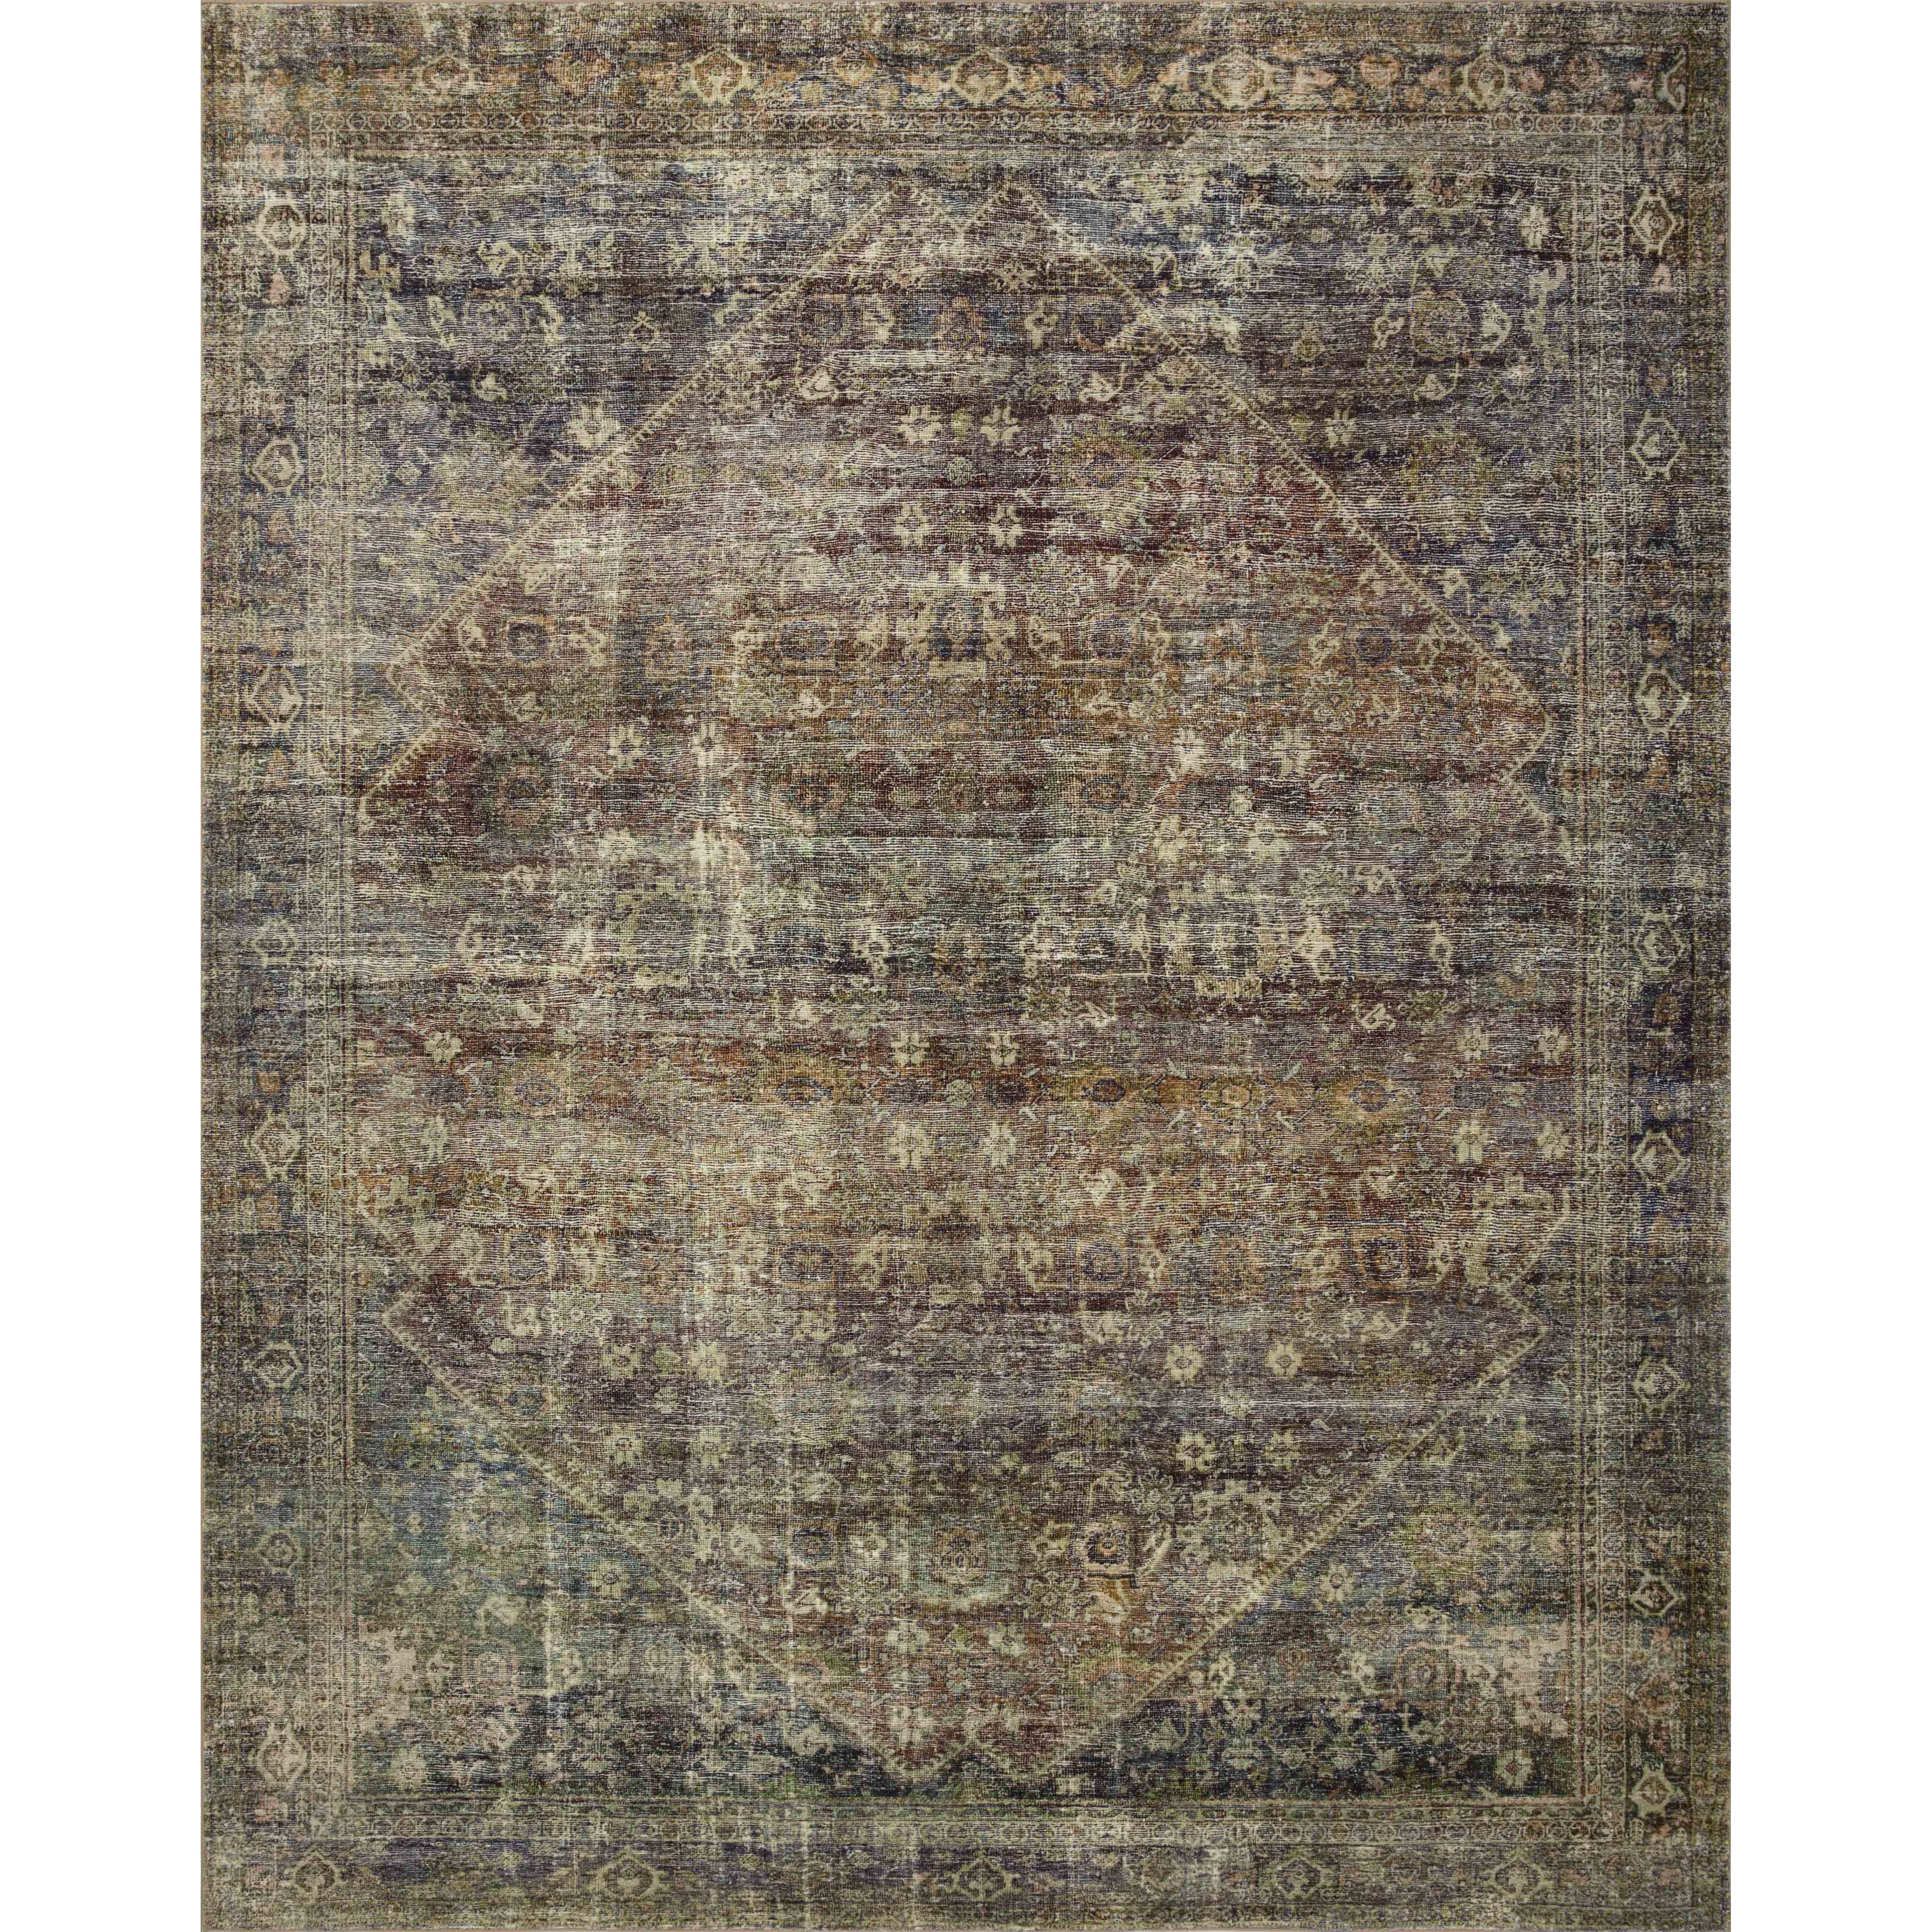 With the faded feel of an antique rug, the Amber Lewis x Loloi Morgan Spice / Lagoon Rug is a feat of modern printed construction. These impressive area rugs expertly blend sophisticated tones to recreate the dynamic colors of a vintage textiles. Power-loomed of CloudPile™ construction, these rugs are extra-soft to walk upon yet still durable for high-traffic rooms. Amethyst Home provides interior design services, furniture, rugs, and lighting in the Portland metro area.